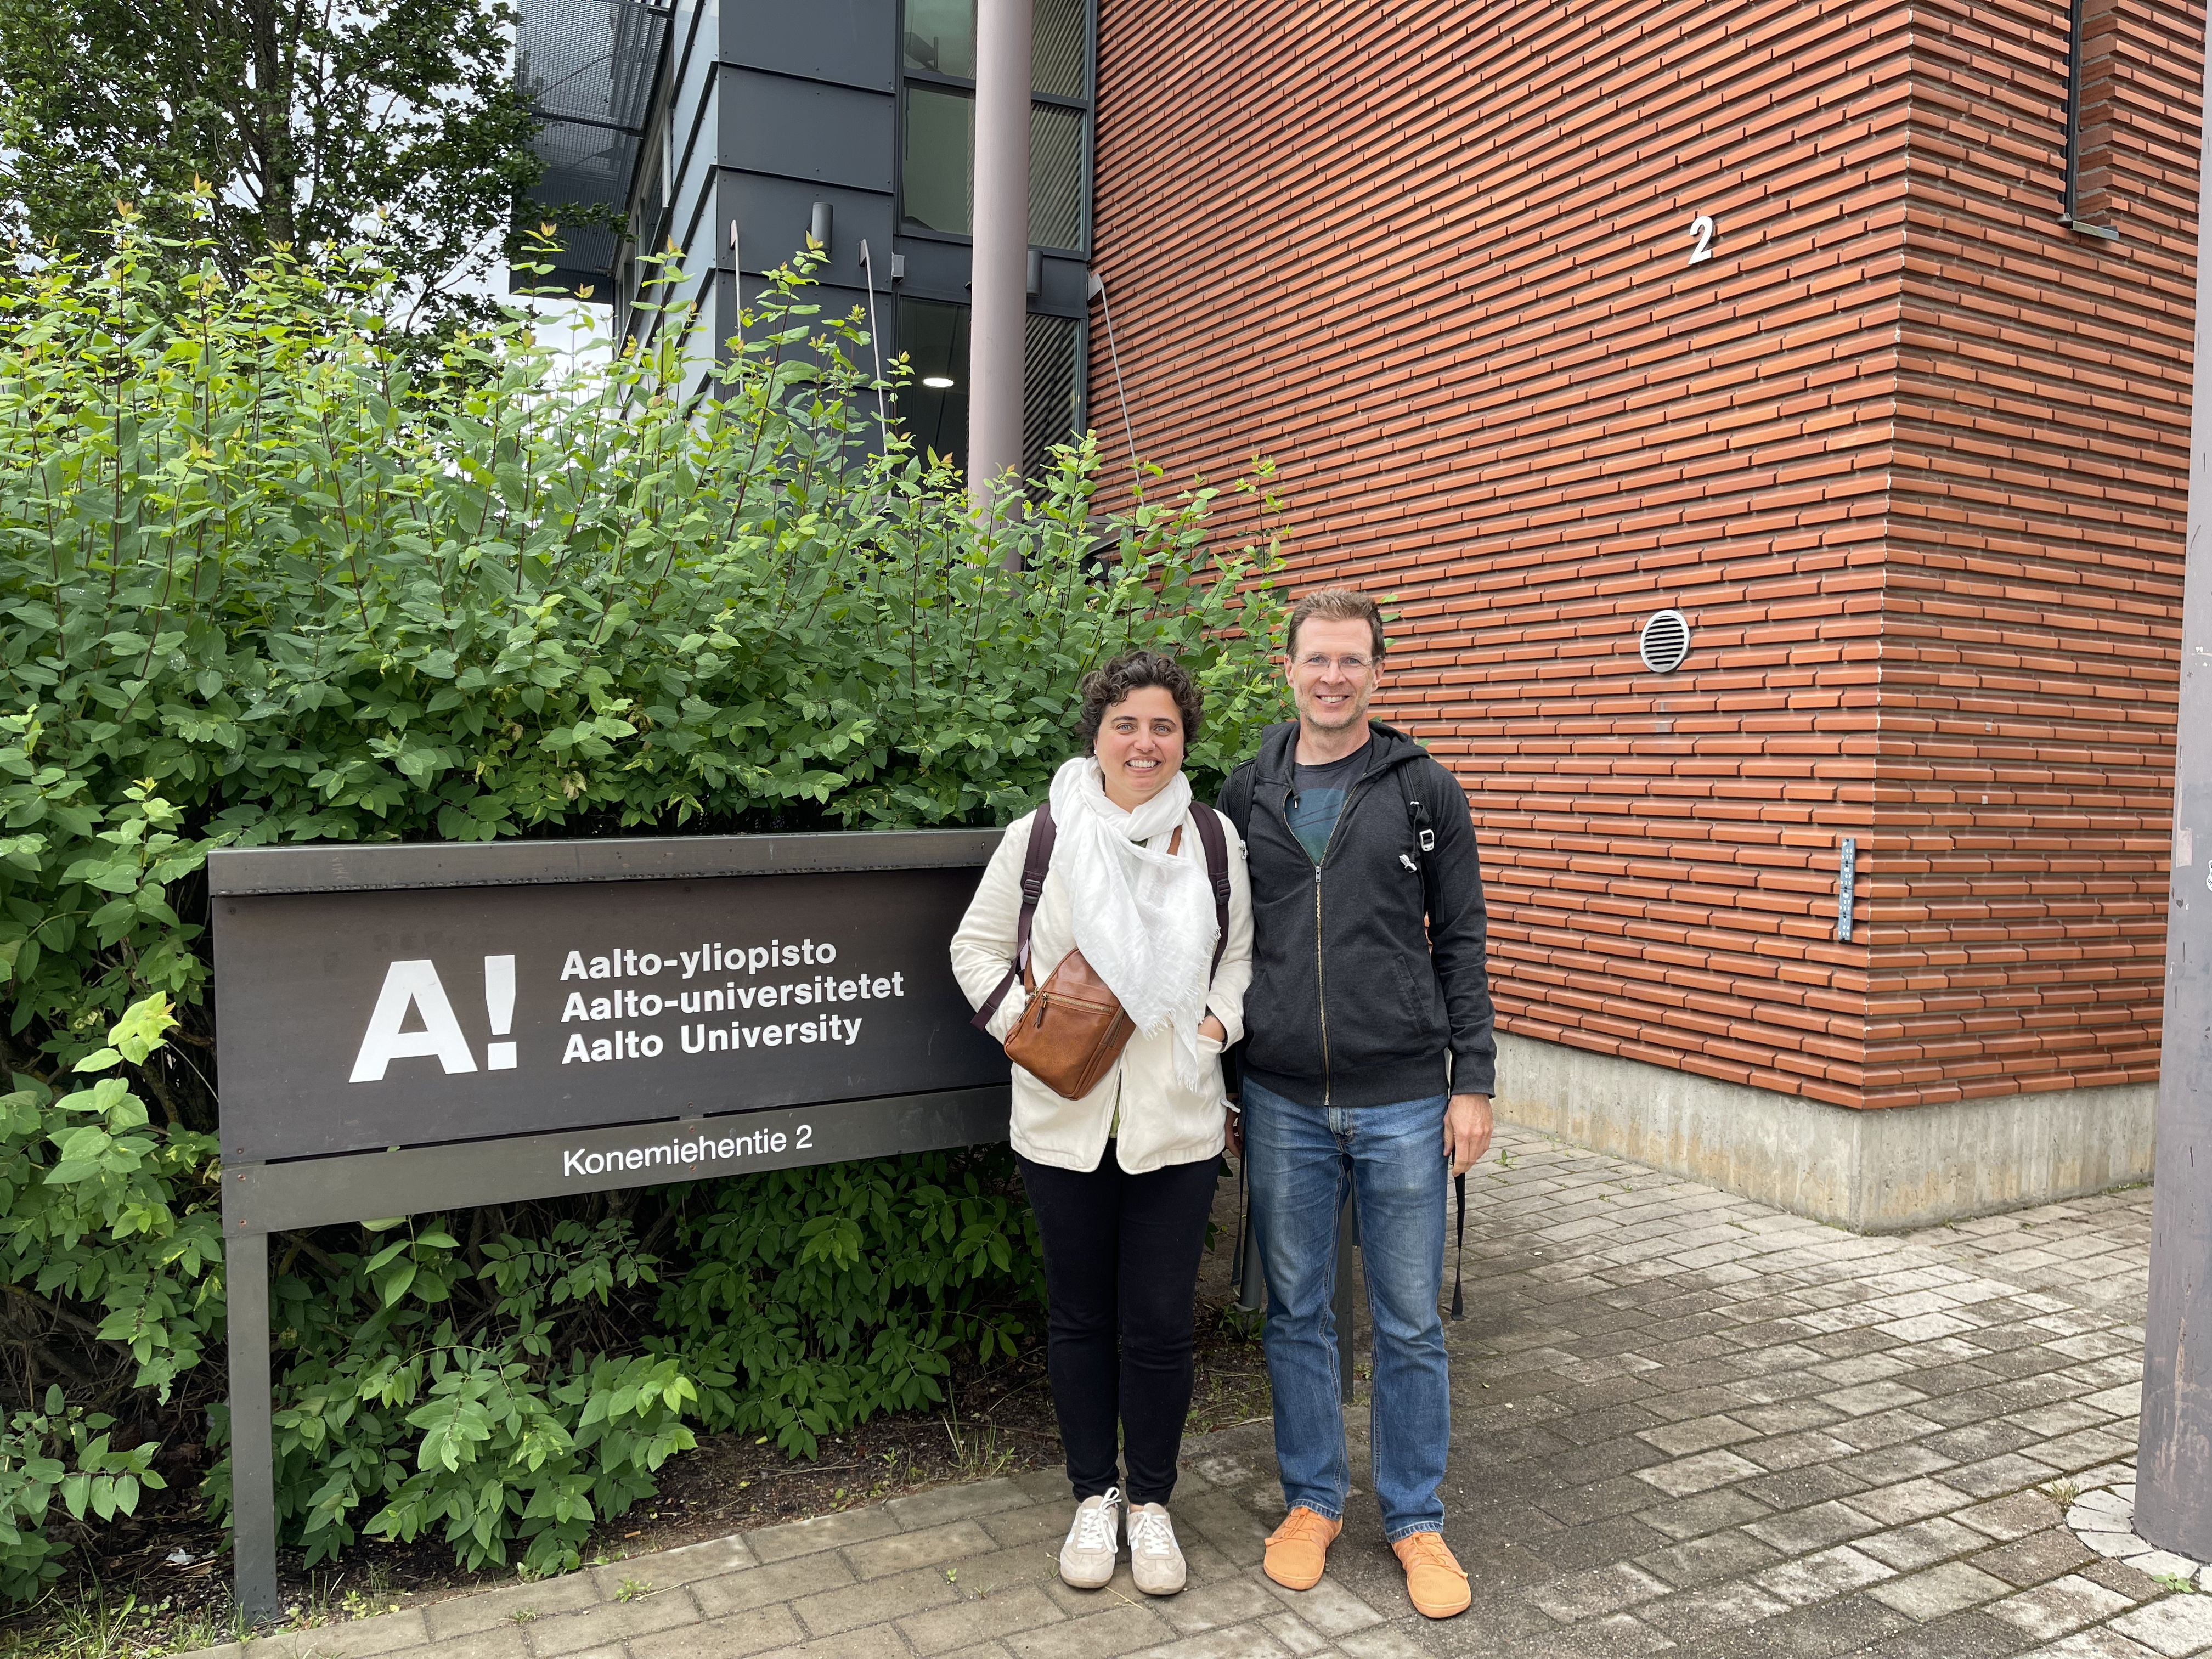 A man and a woman next to a sign that reads Aalto University with university's name written first in Finnish, then in Swedish, and then in English.